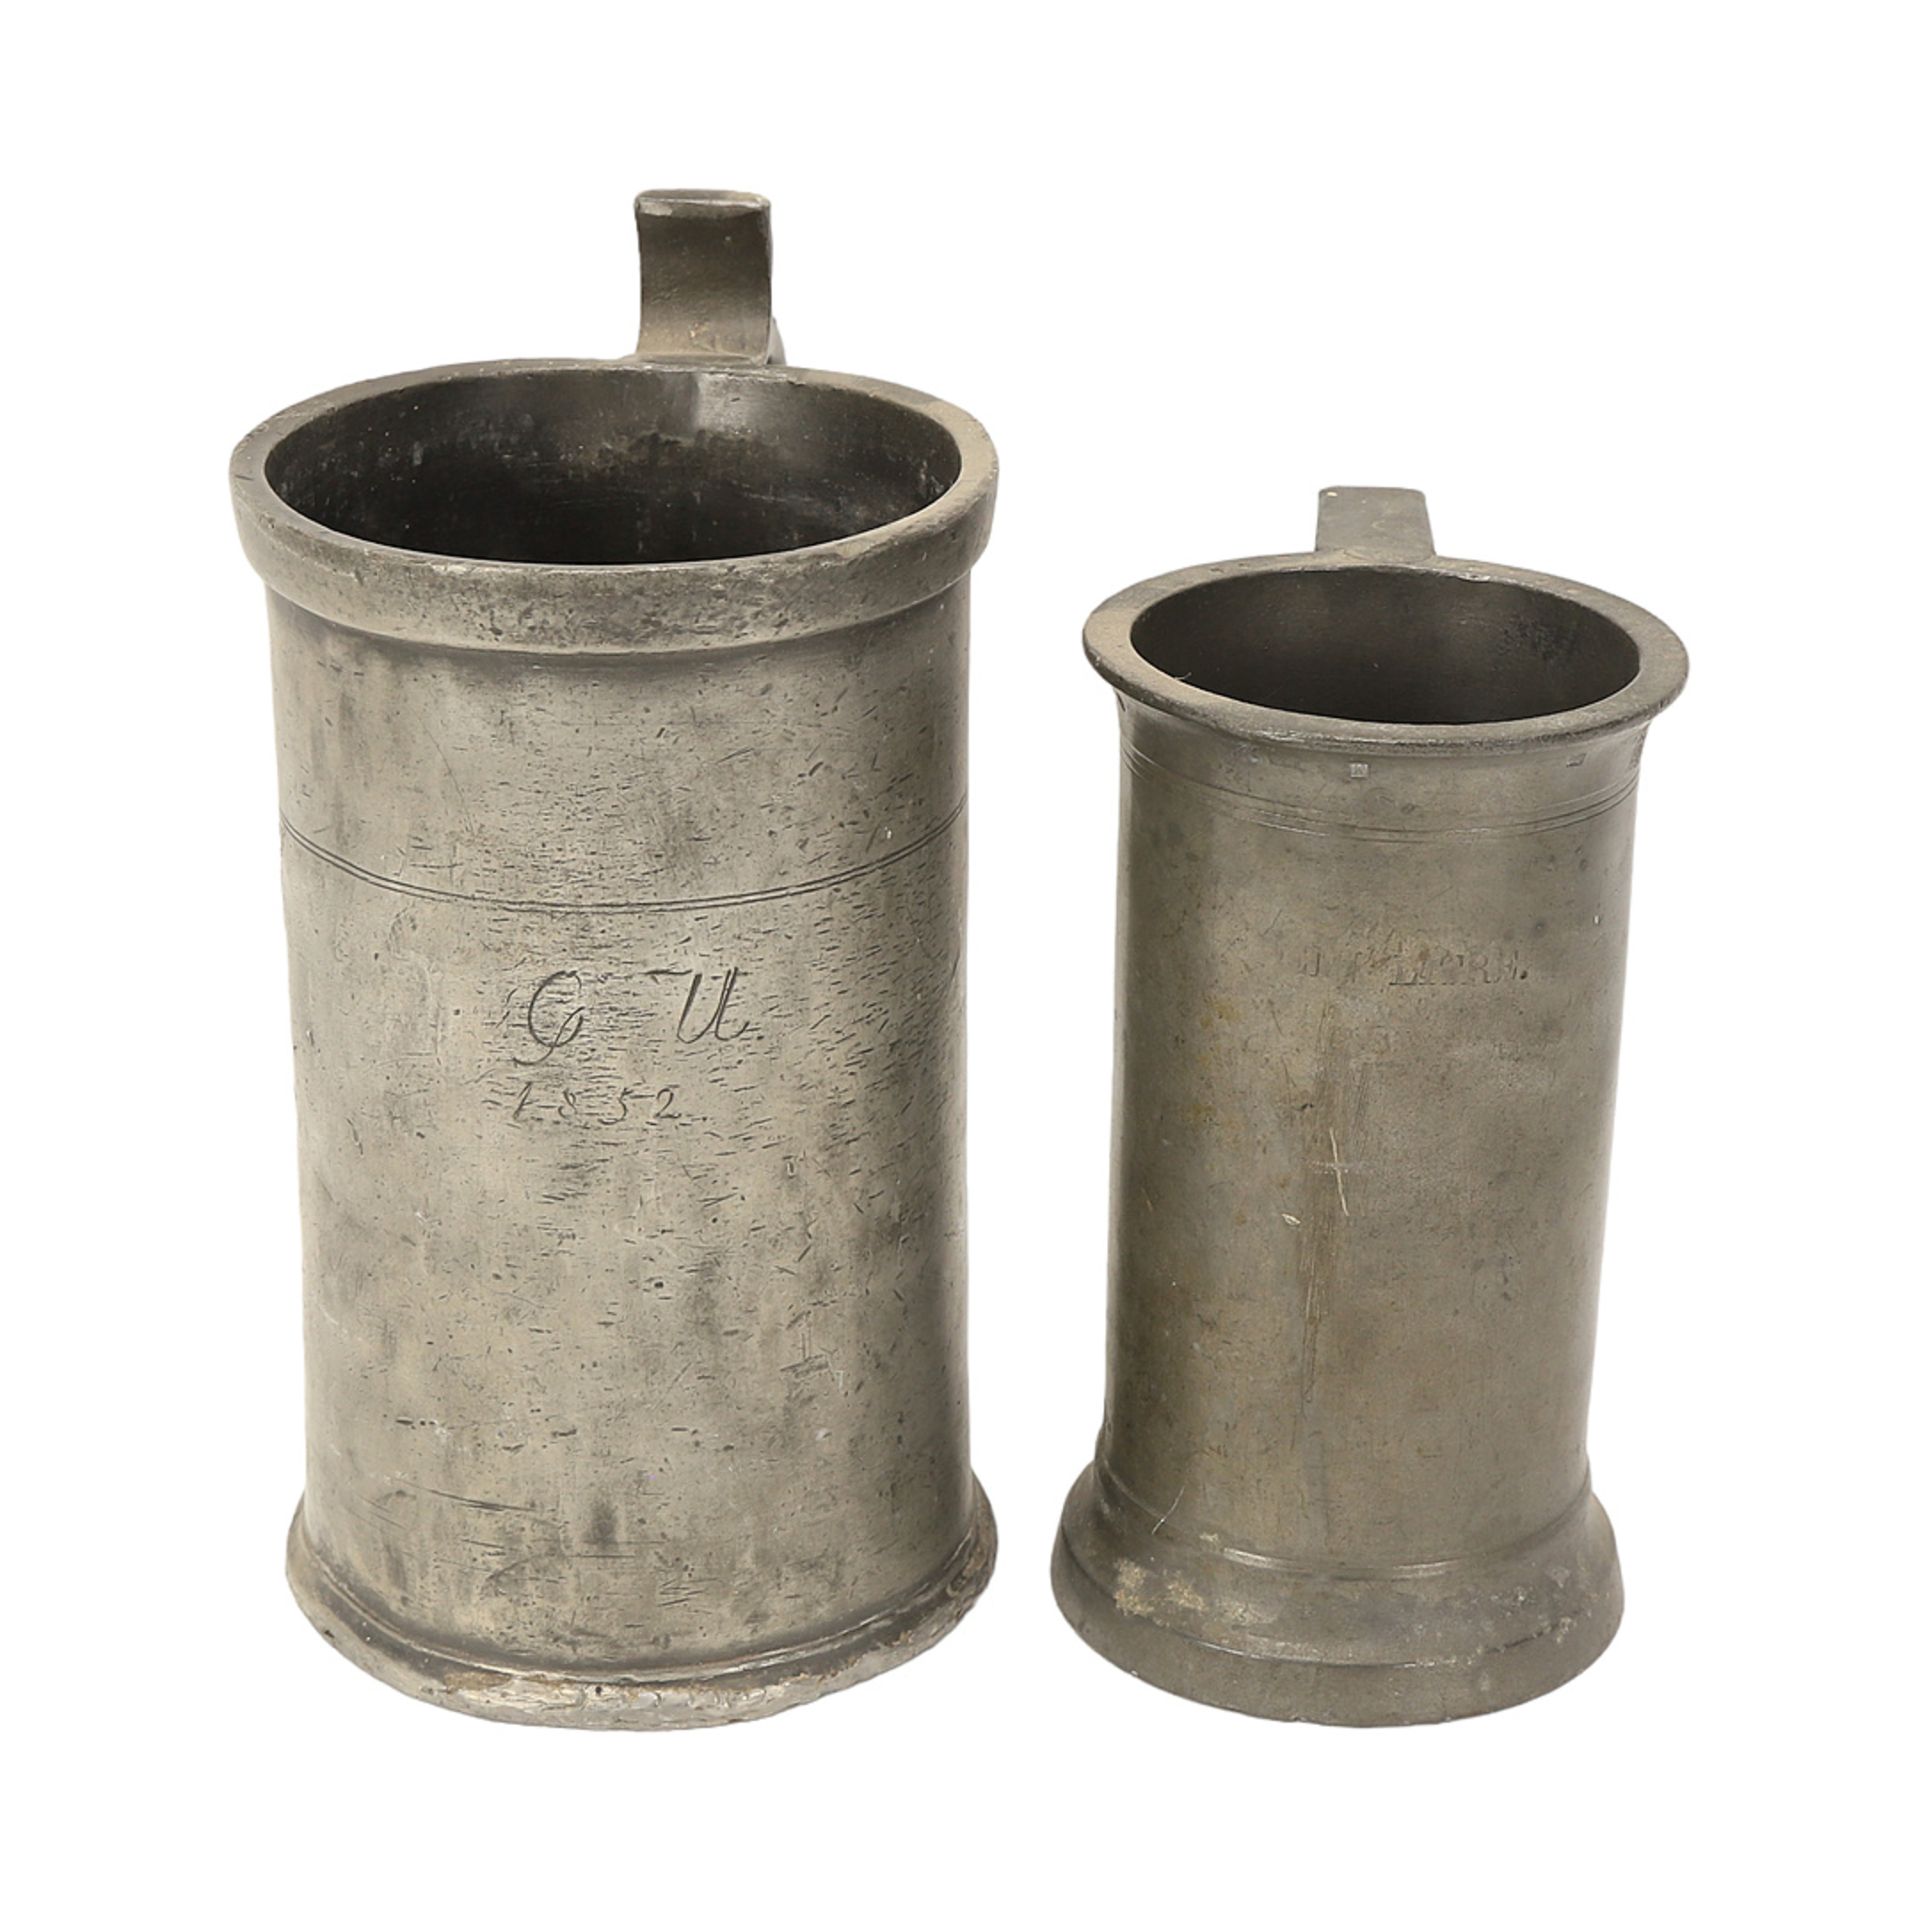 Small collection of pewter, Germany / France, 18th/19th century - Image 3 of 4